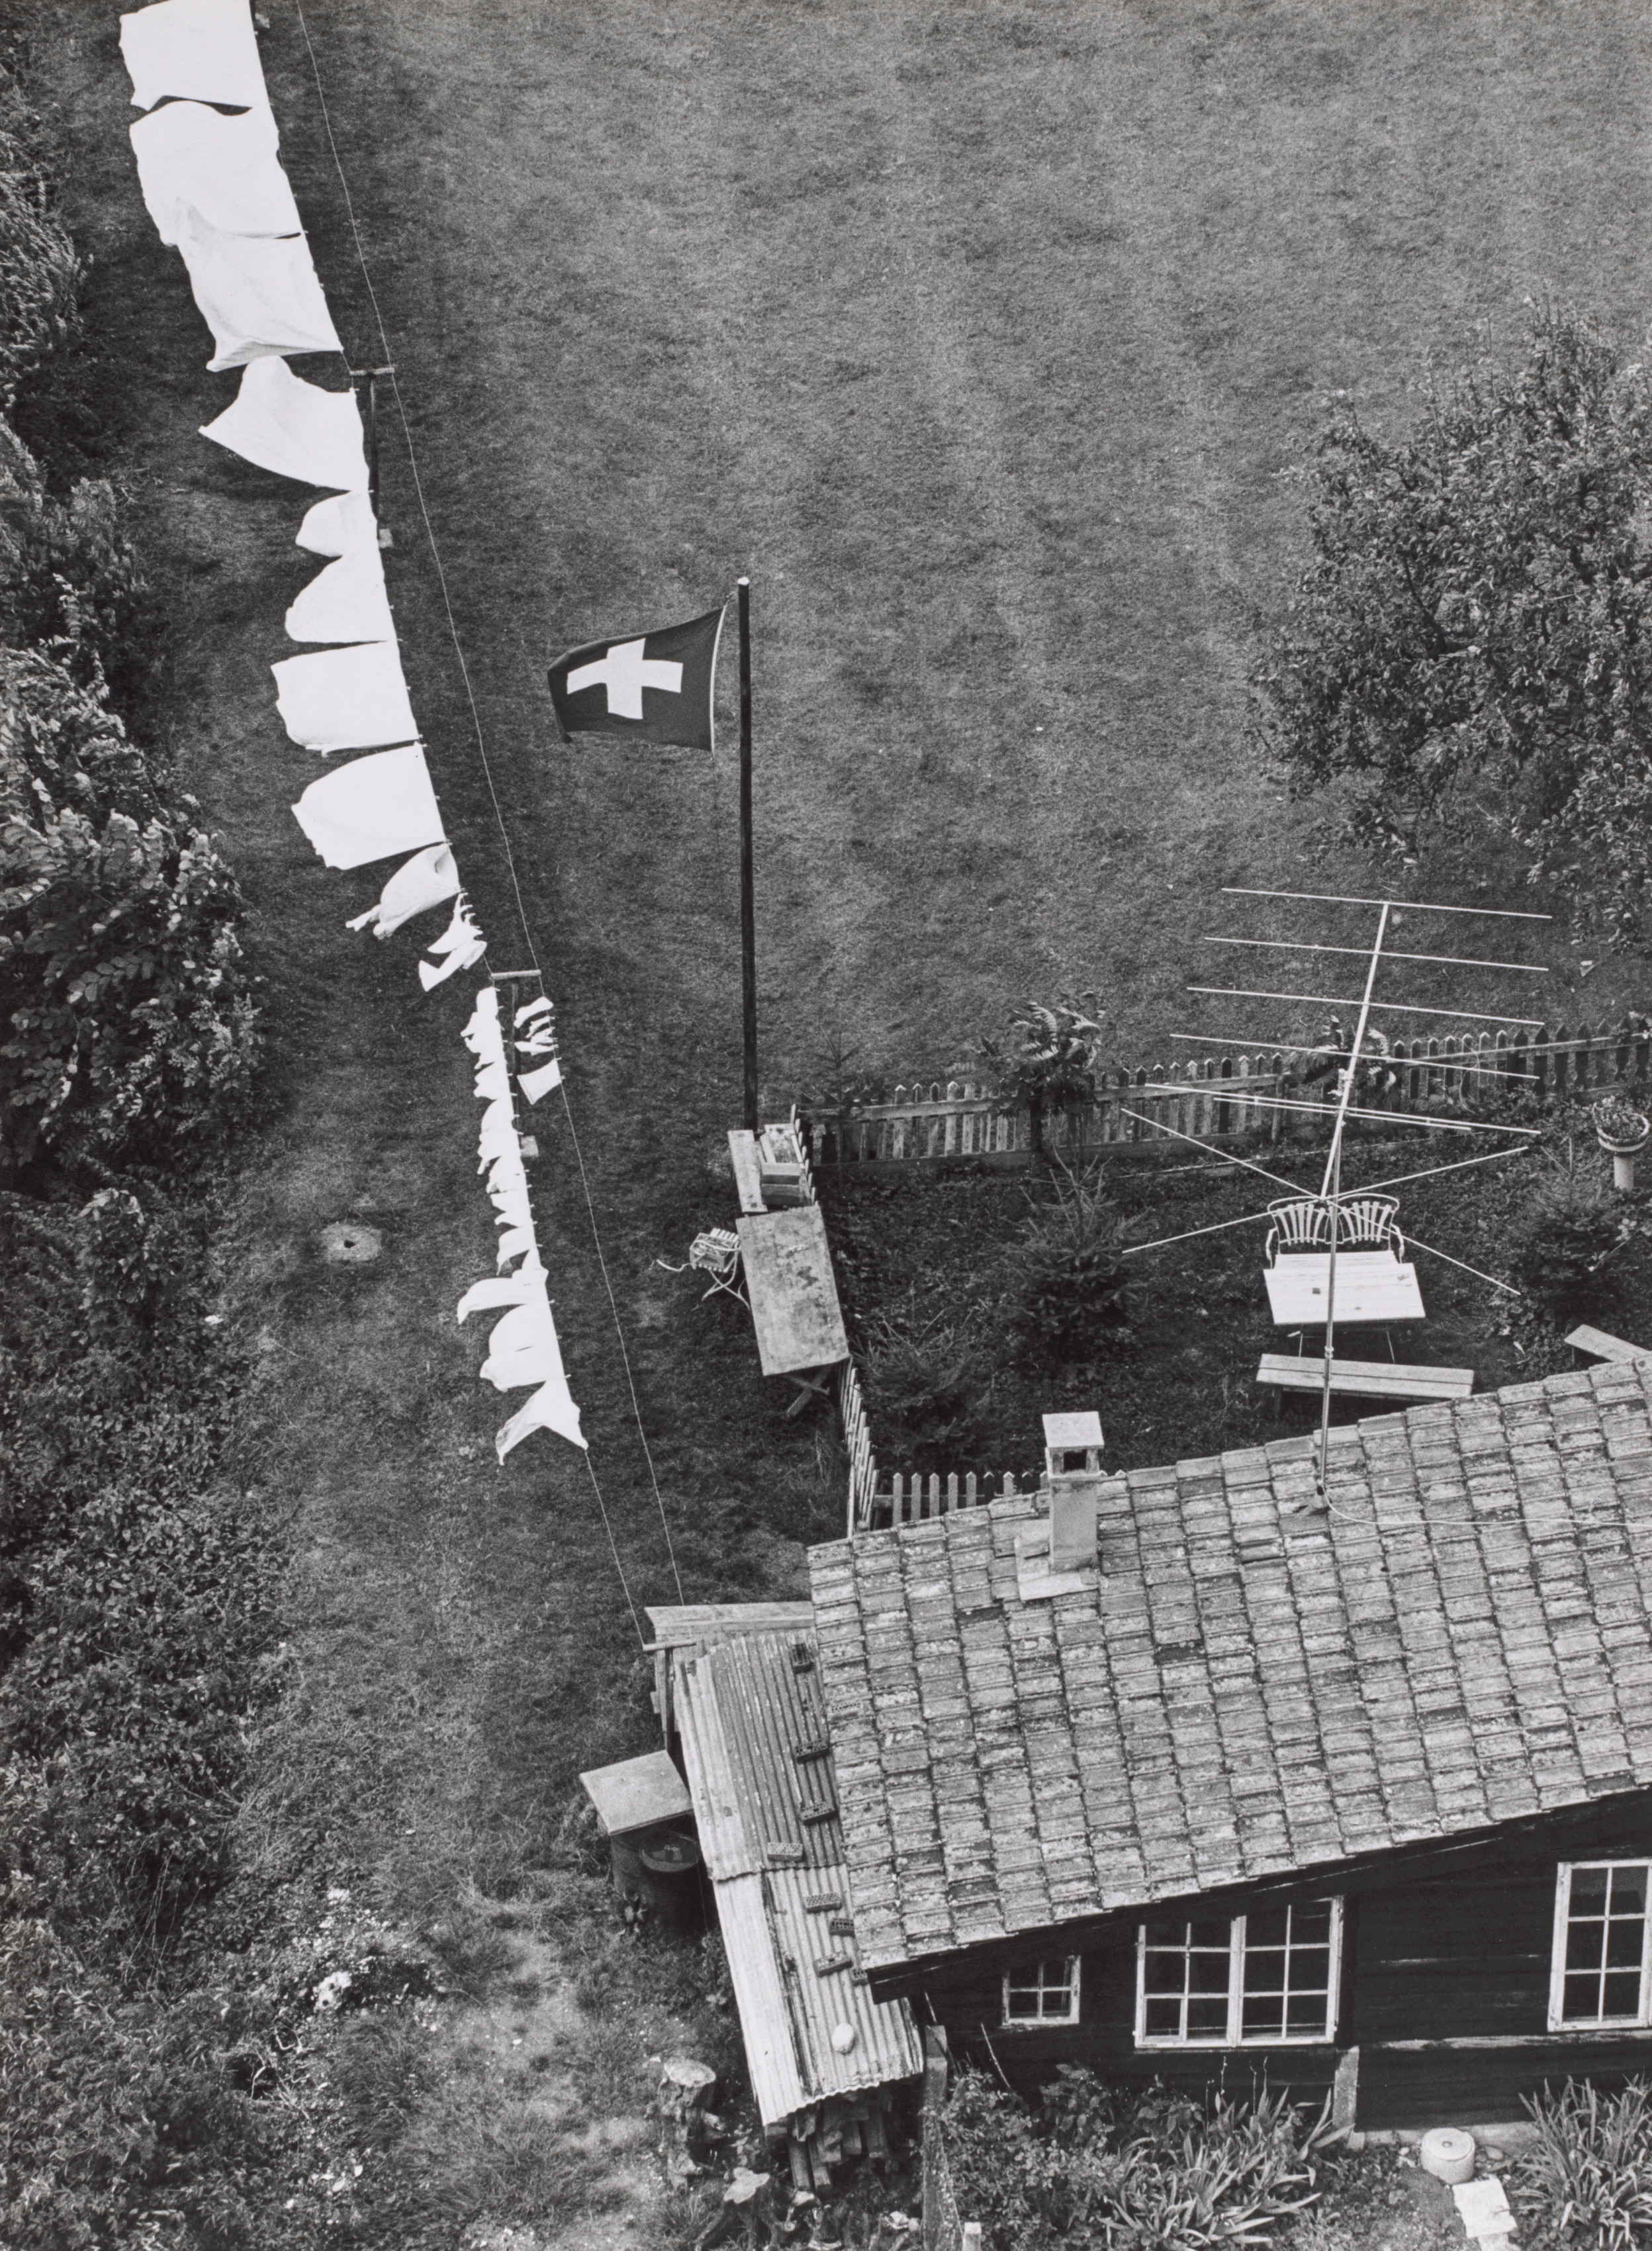 Swiss Happiness: Elevated View of Yard with Drying Laundry and Flag, Switzerland